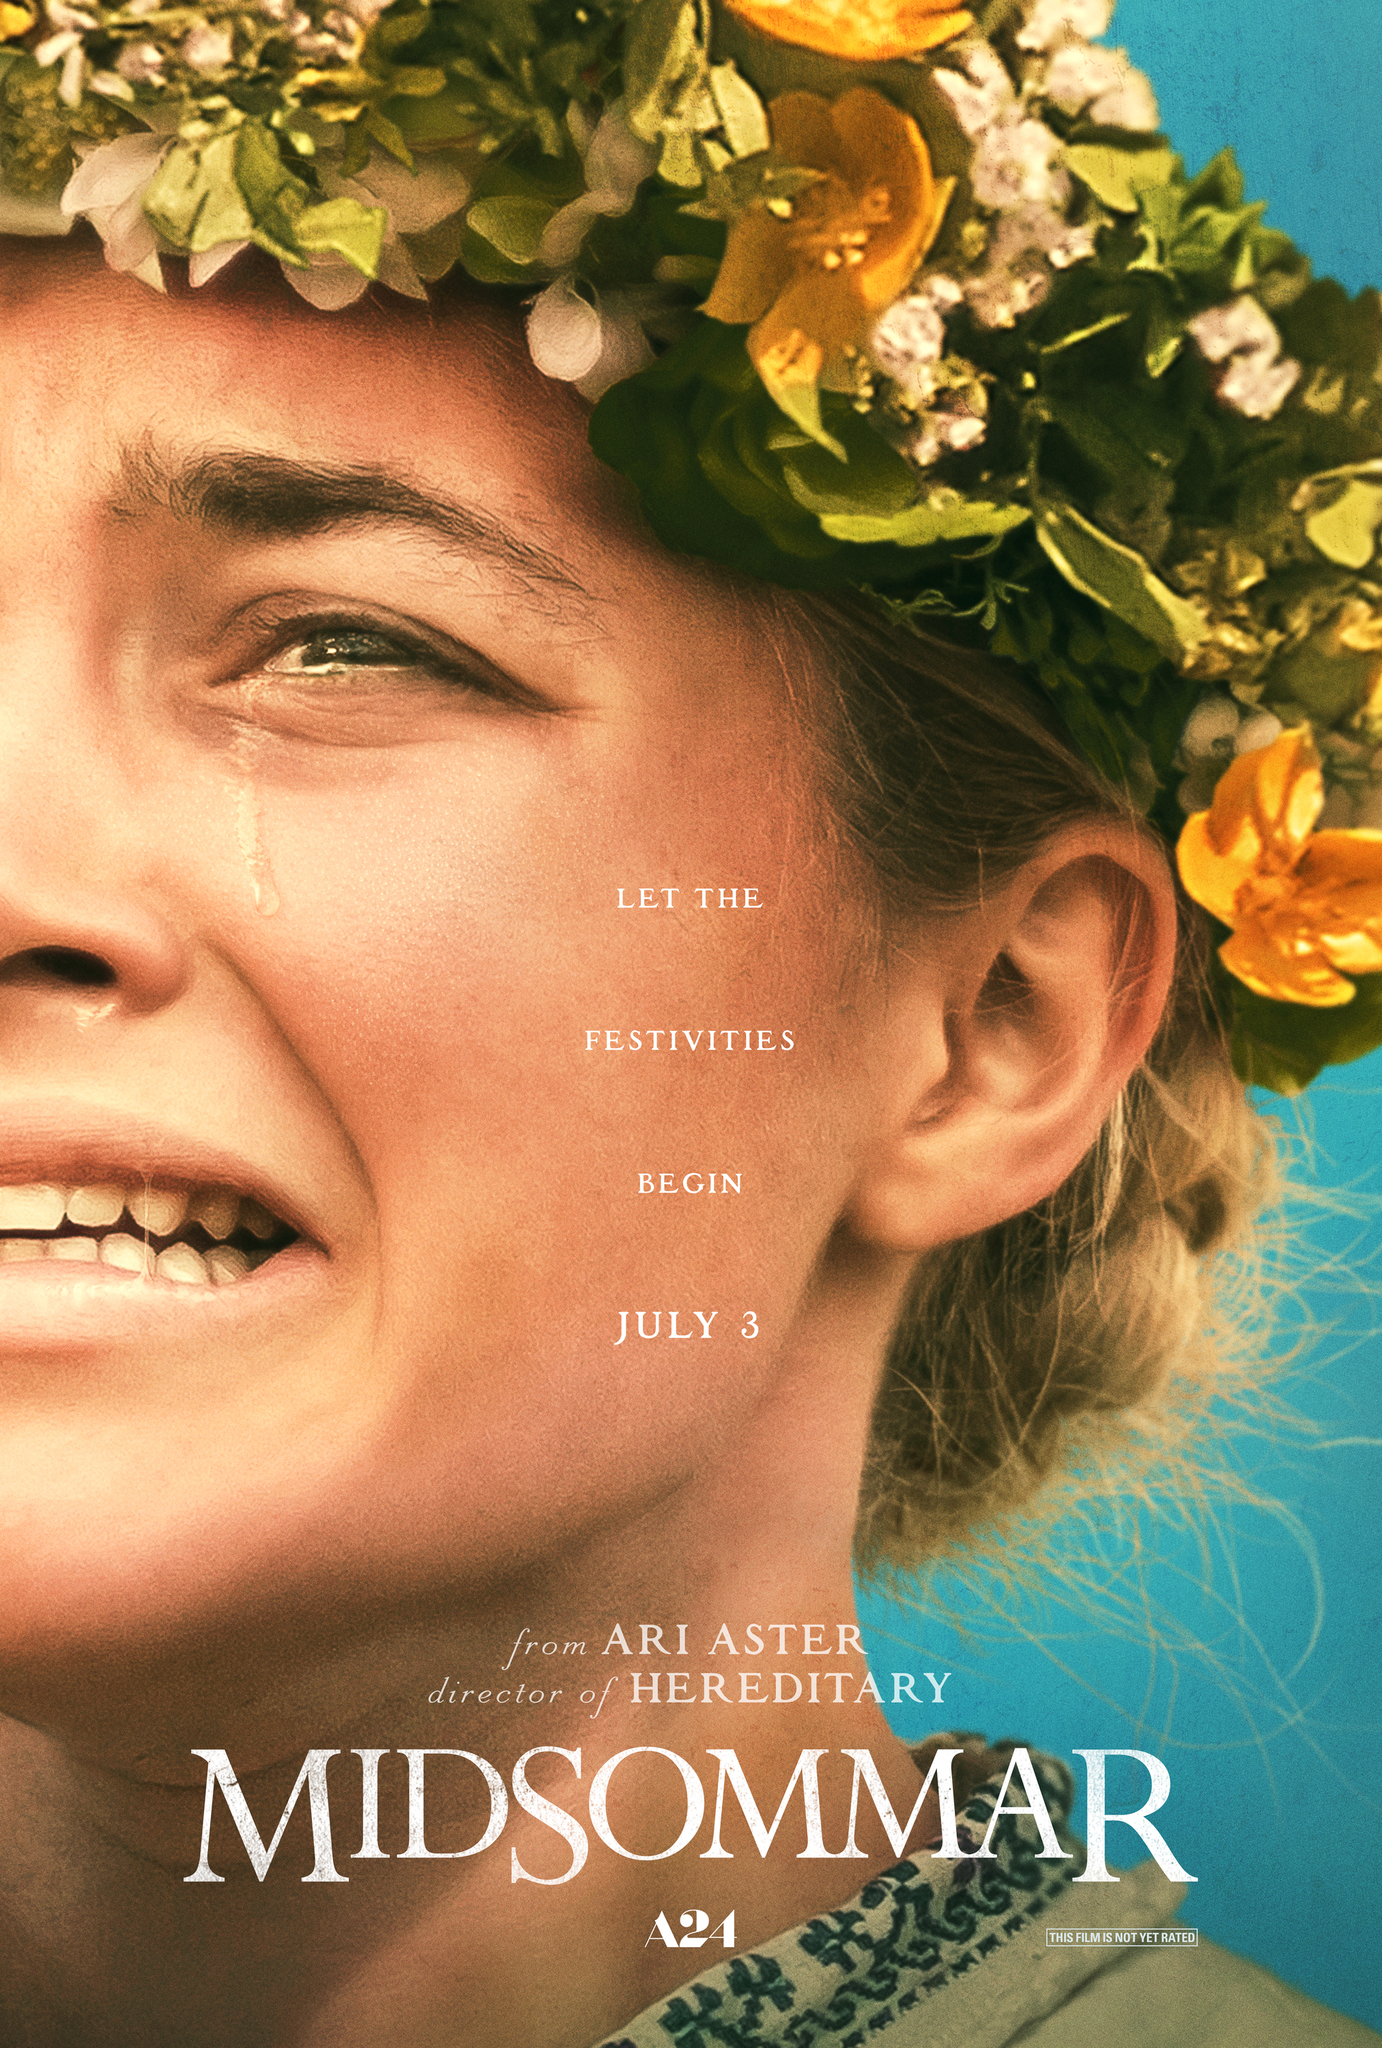 Midsommar film review: the journey is the destination